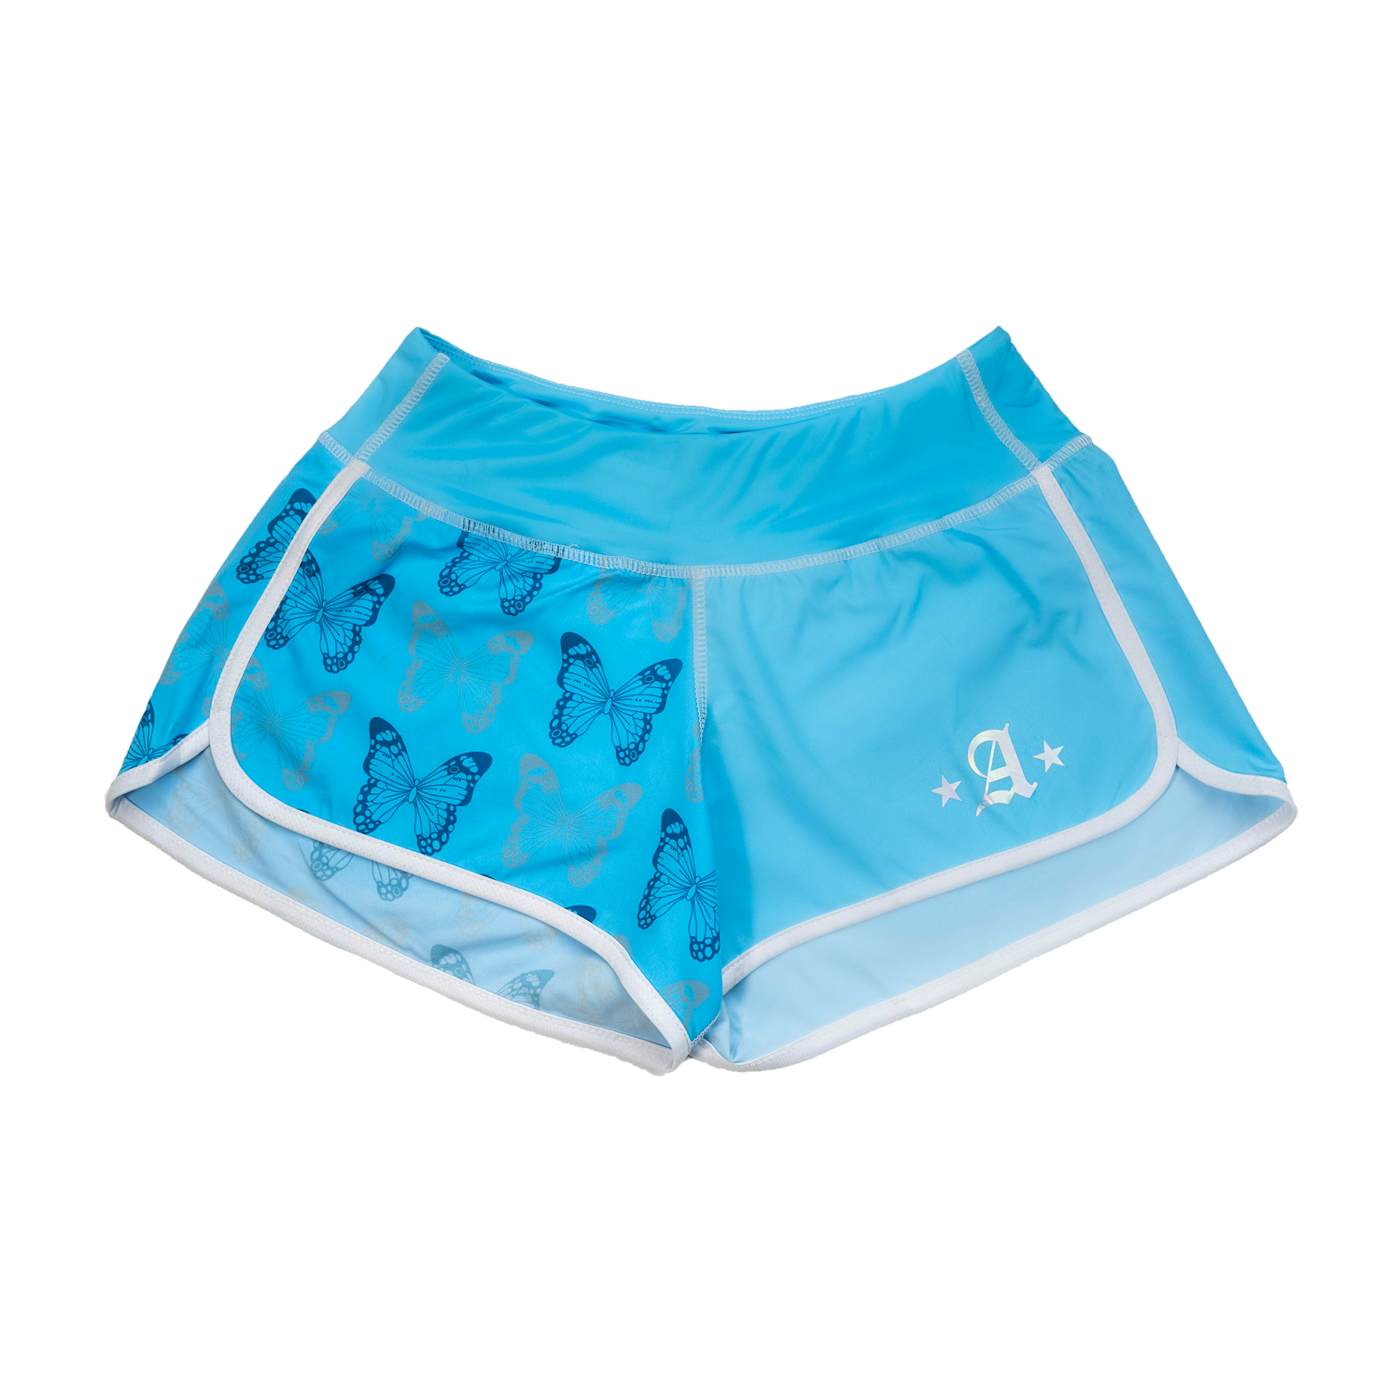 August Alsina Butterfly Training Shorts